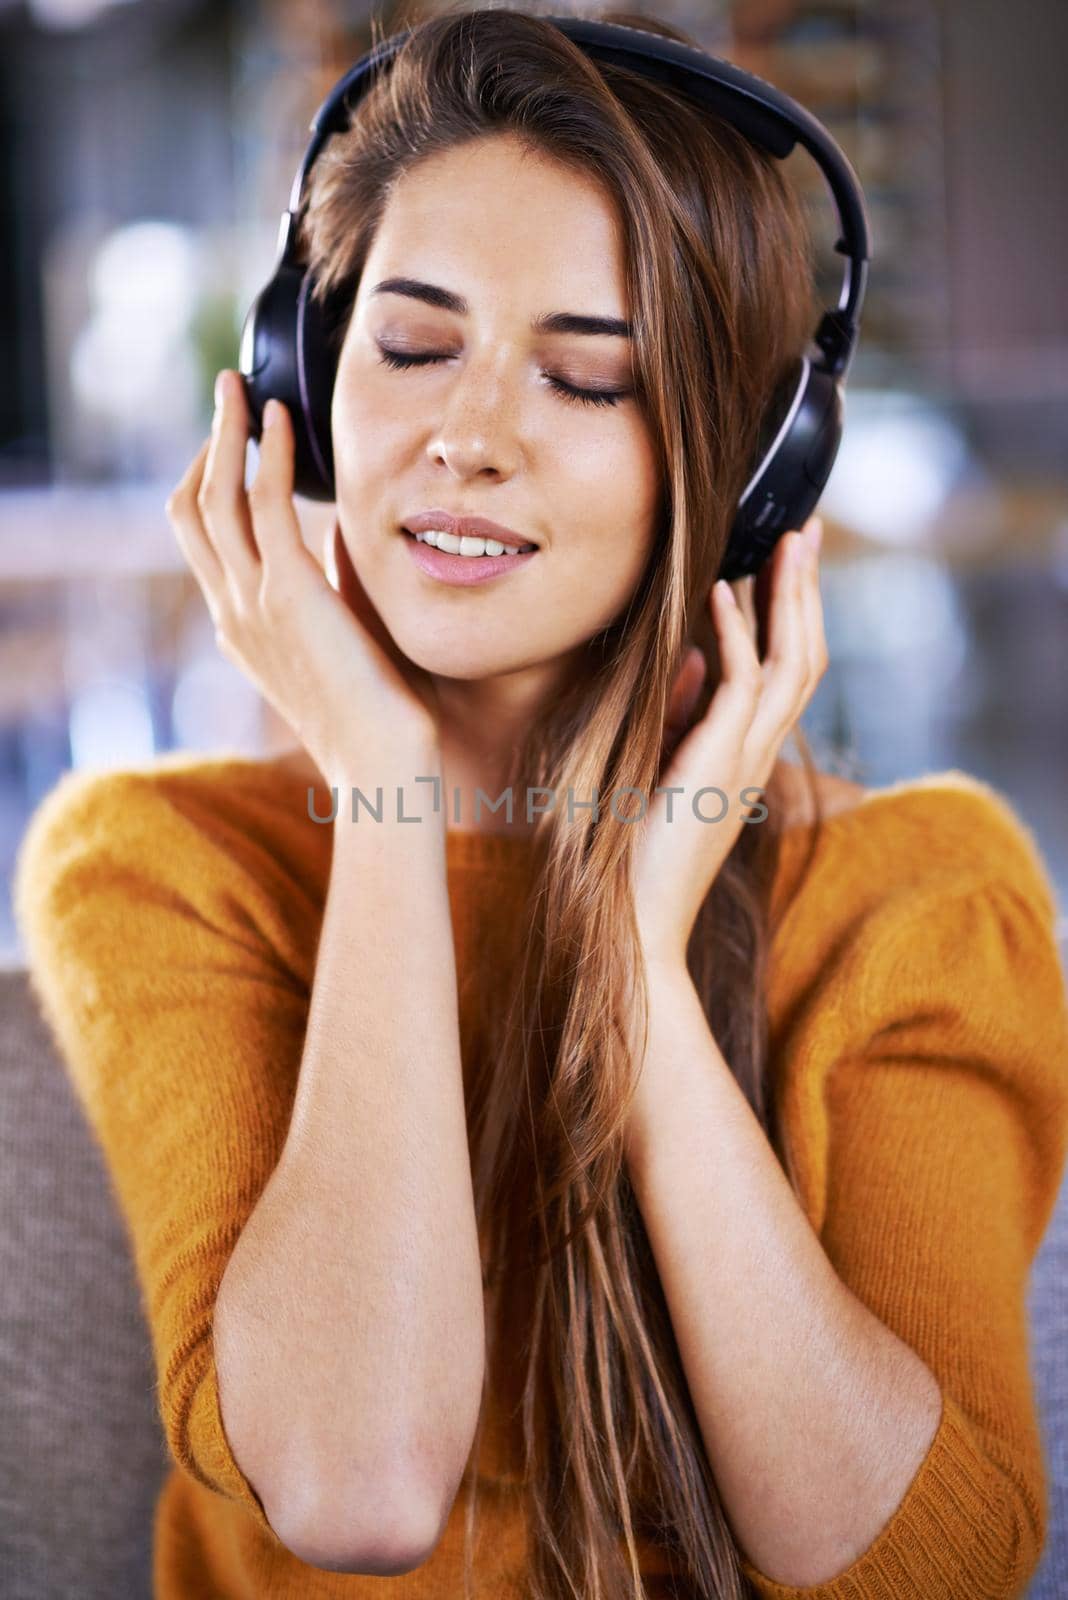 Its one of those relaxed playlists. Beautiful young woman listening to music at home